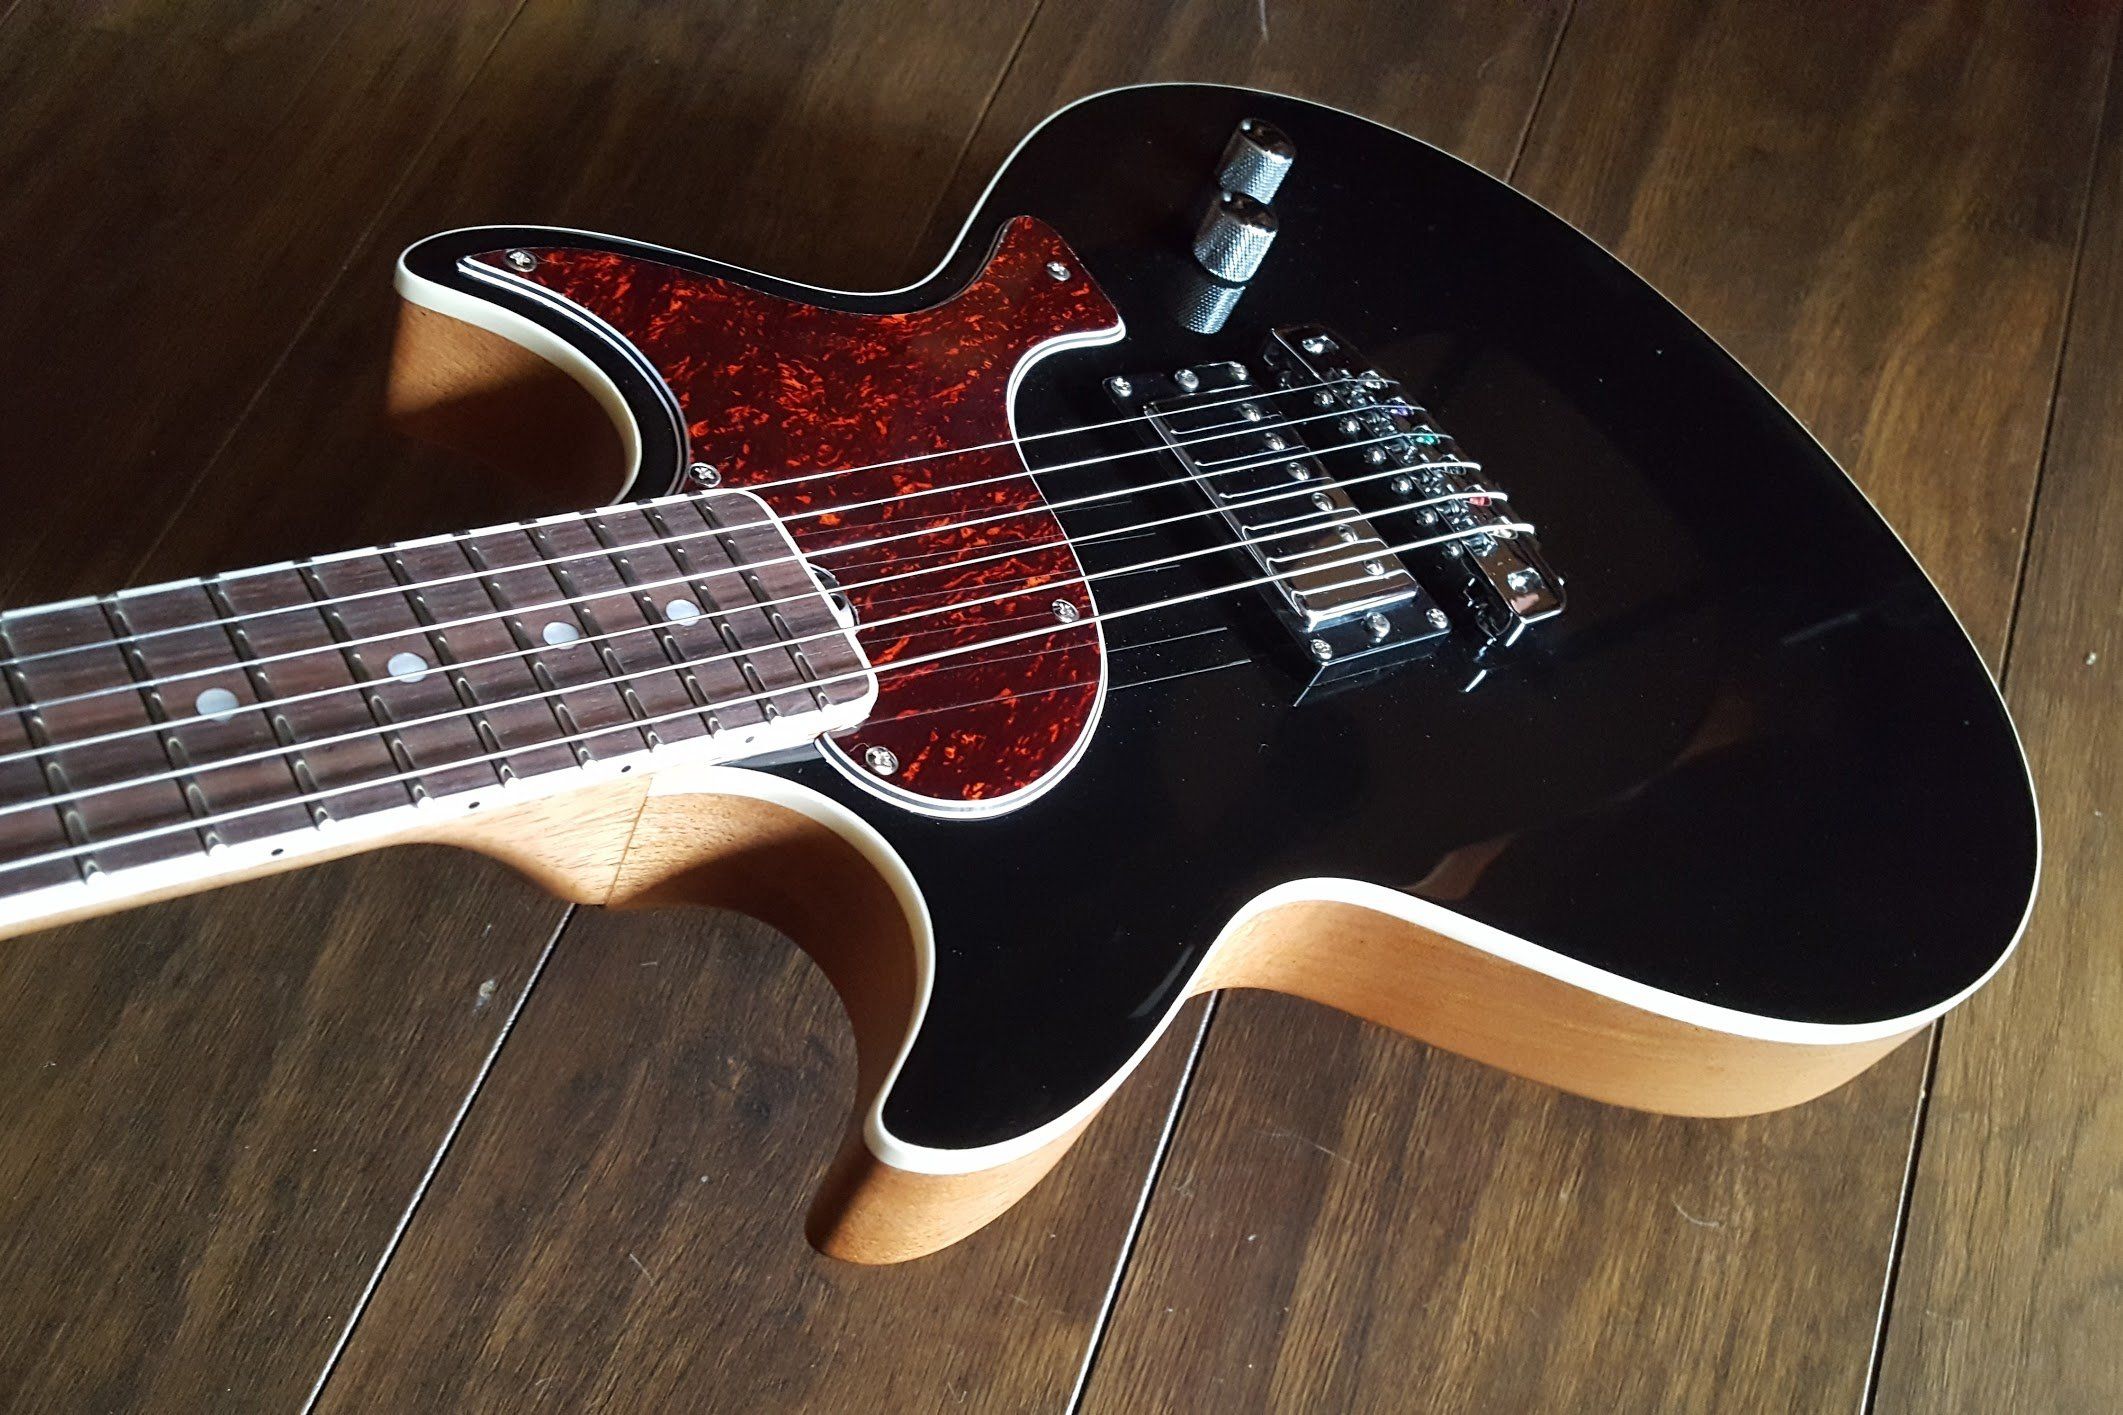 Gordon Smith GS1000 Black, Electric Guitar for sale at Richards Guitars.